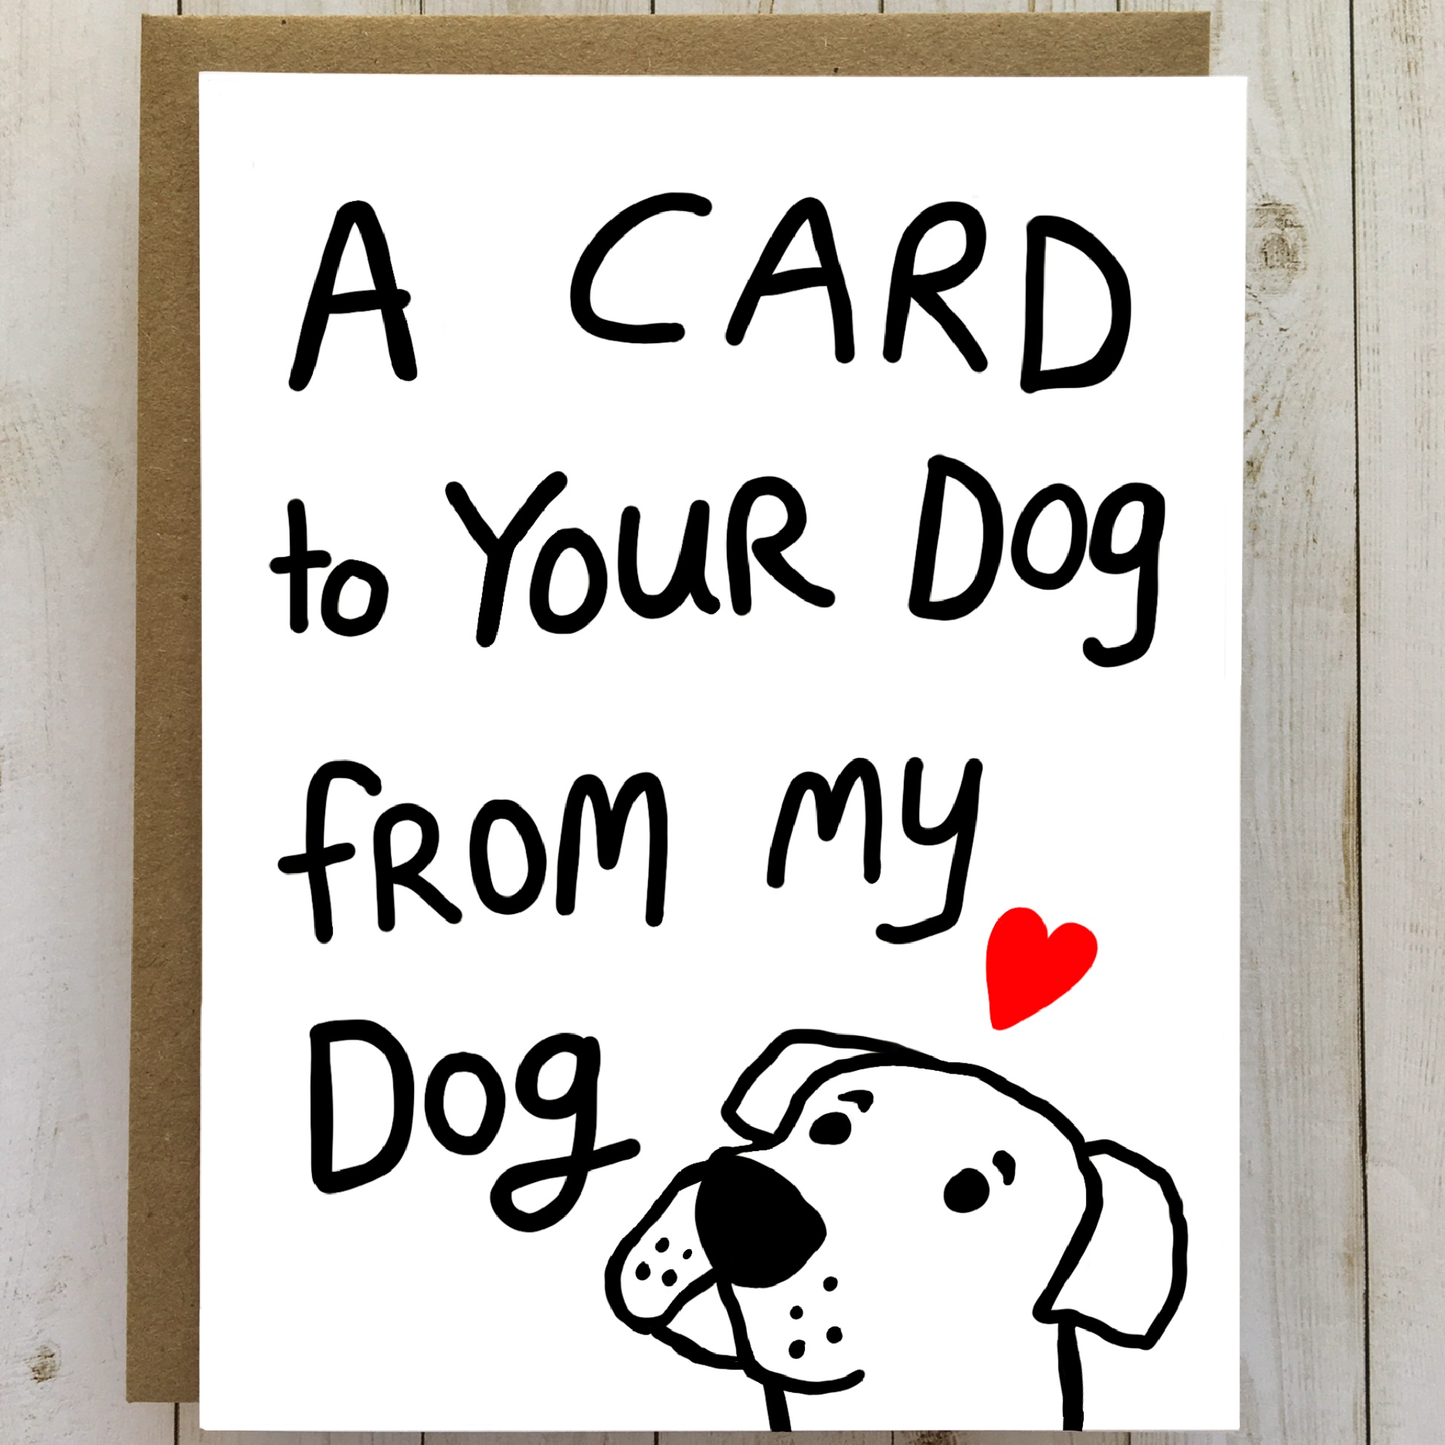 A card to your dog from my dog